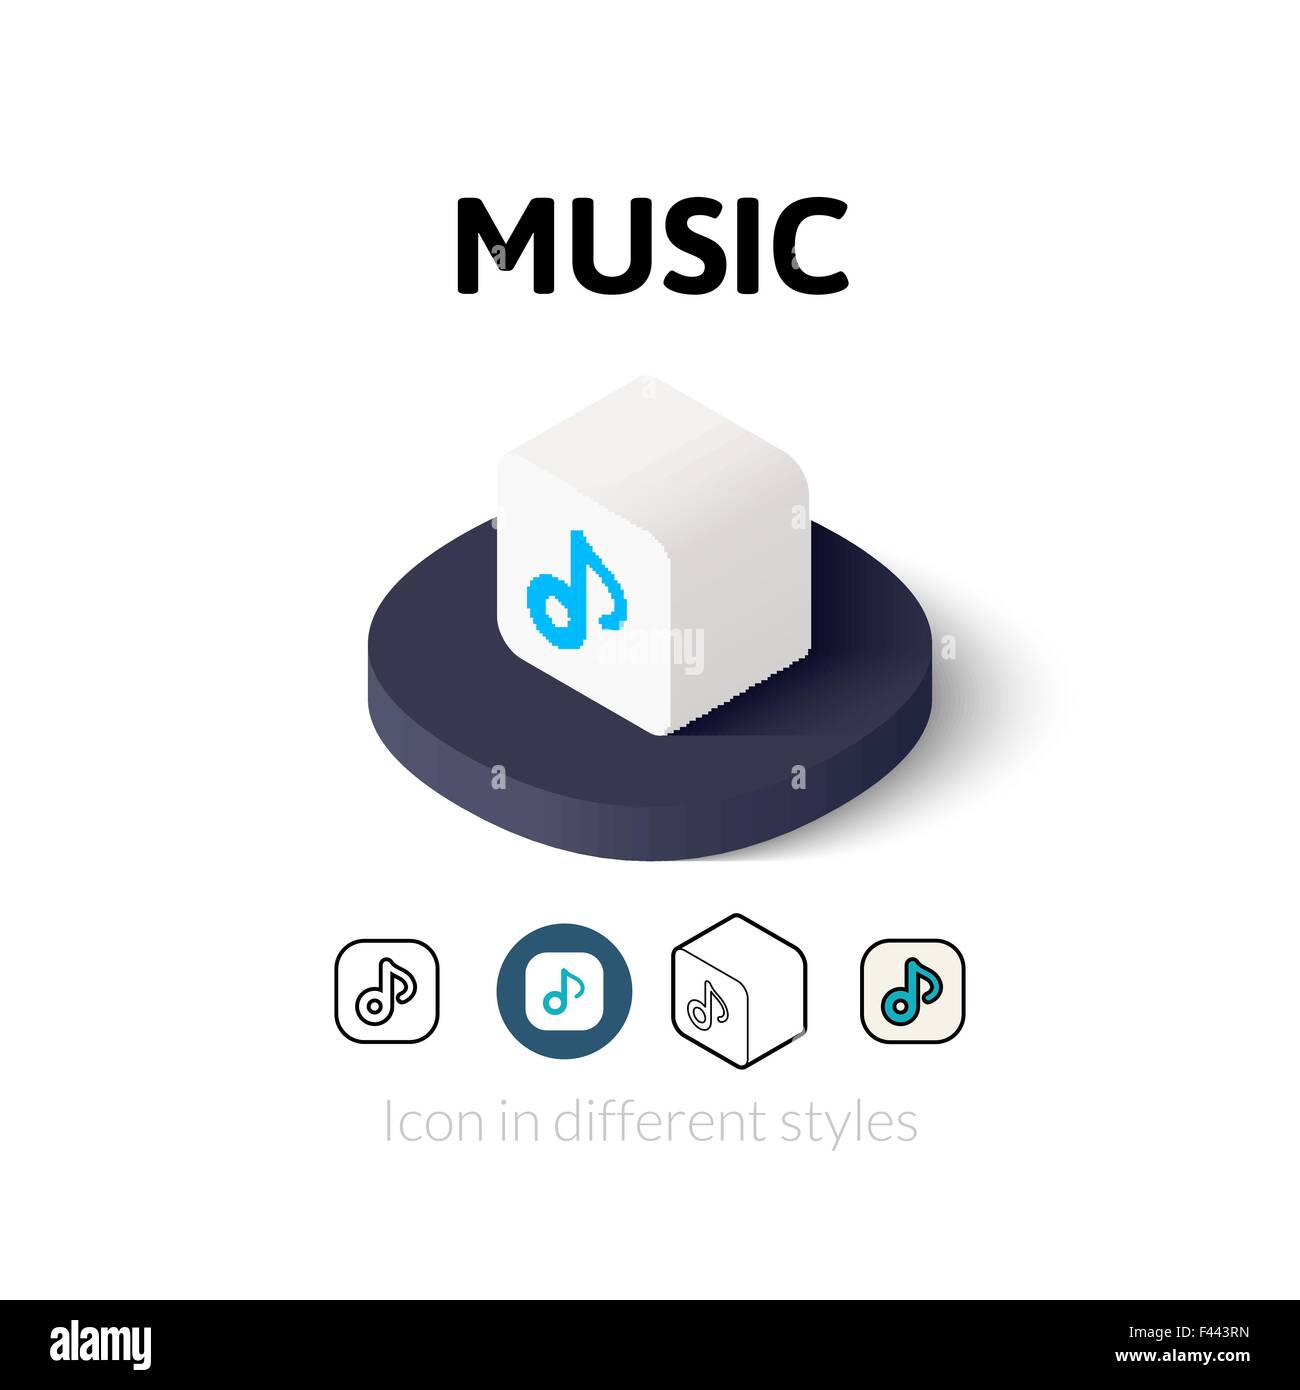 Music icon in different style Stock Vector